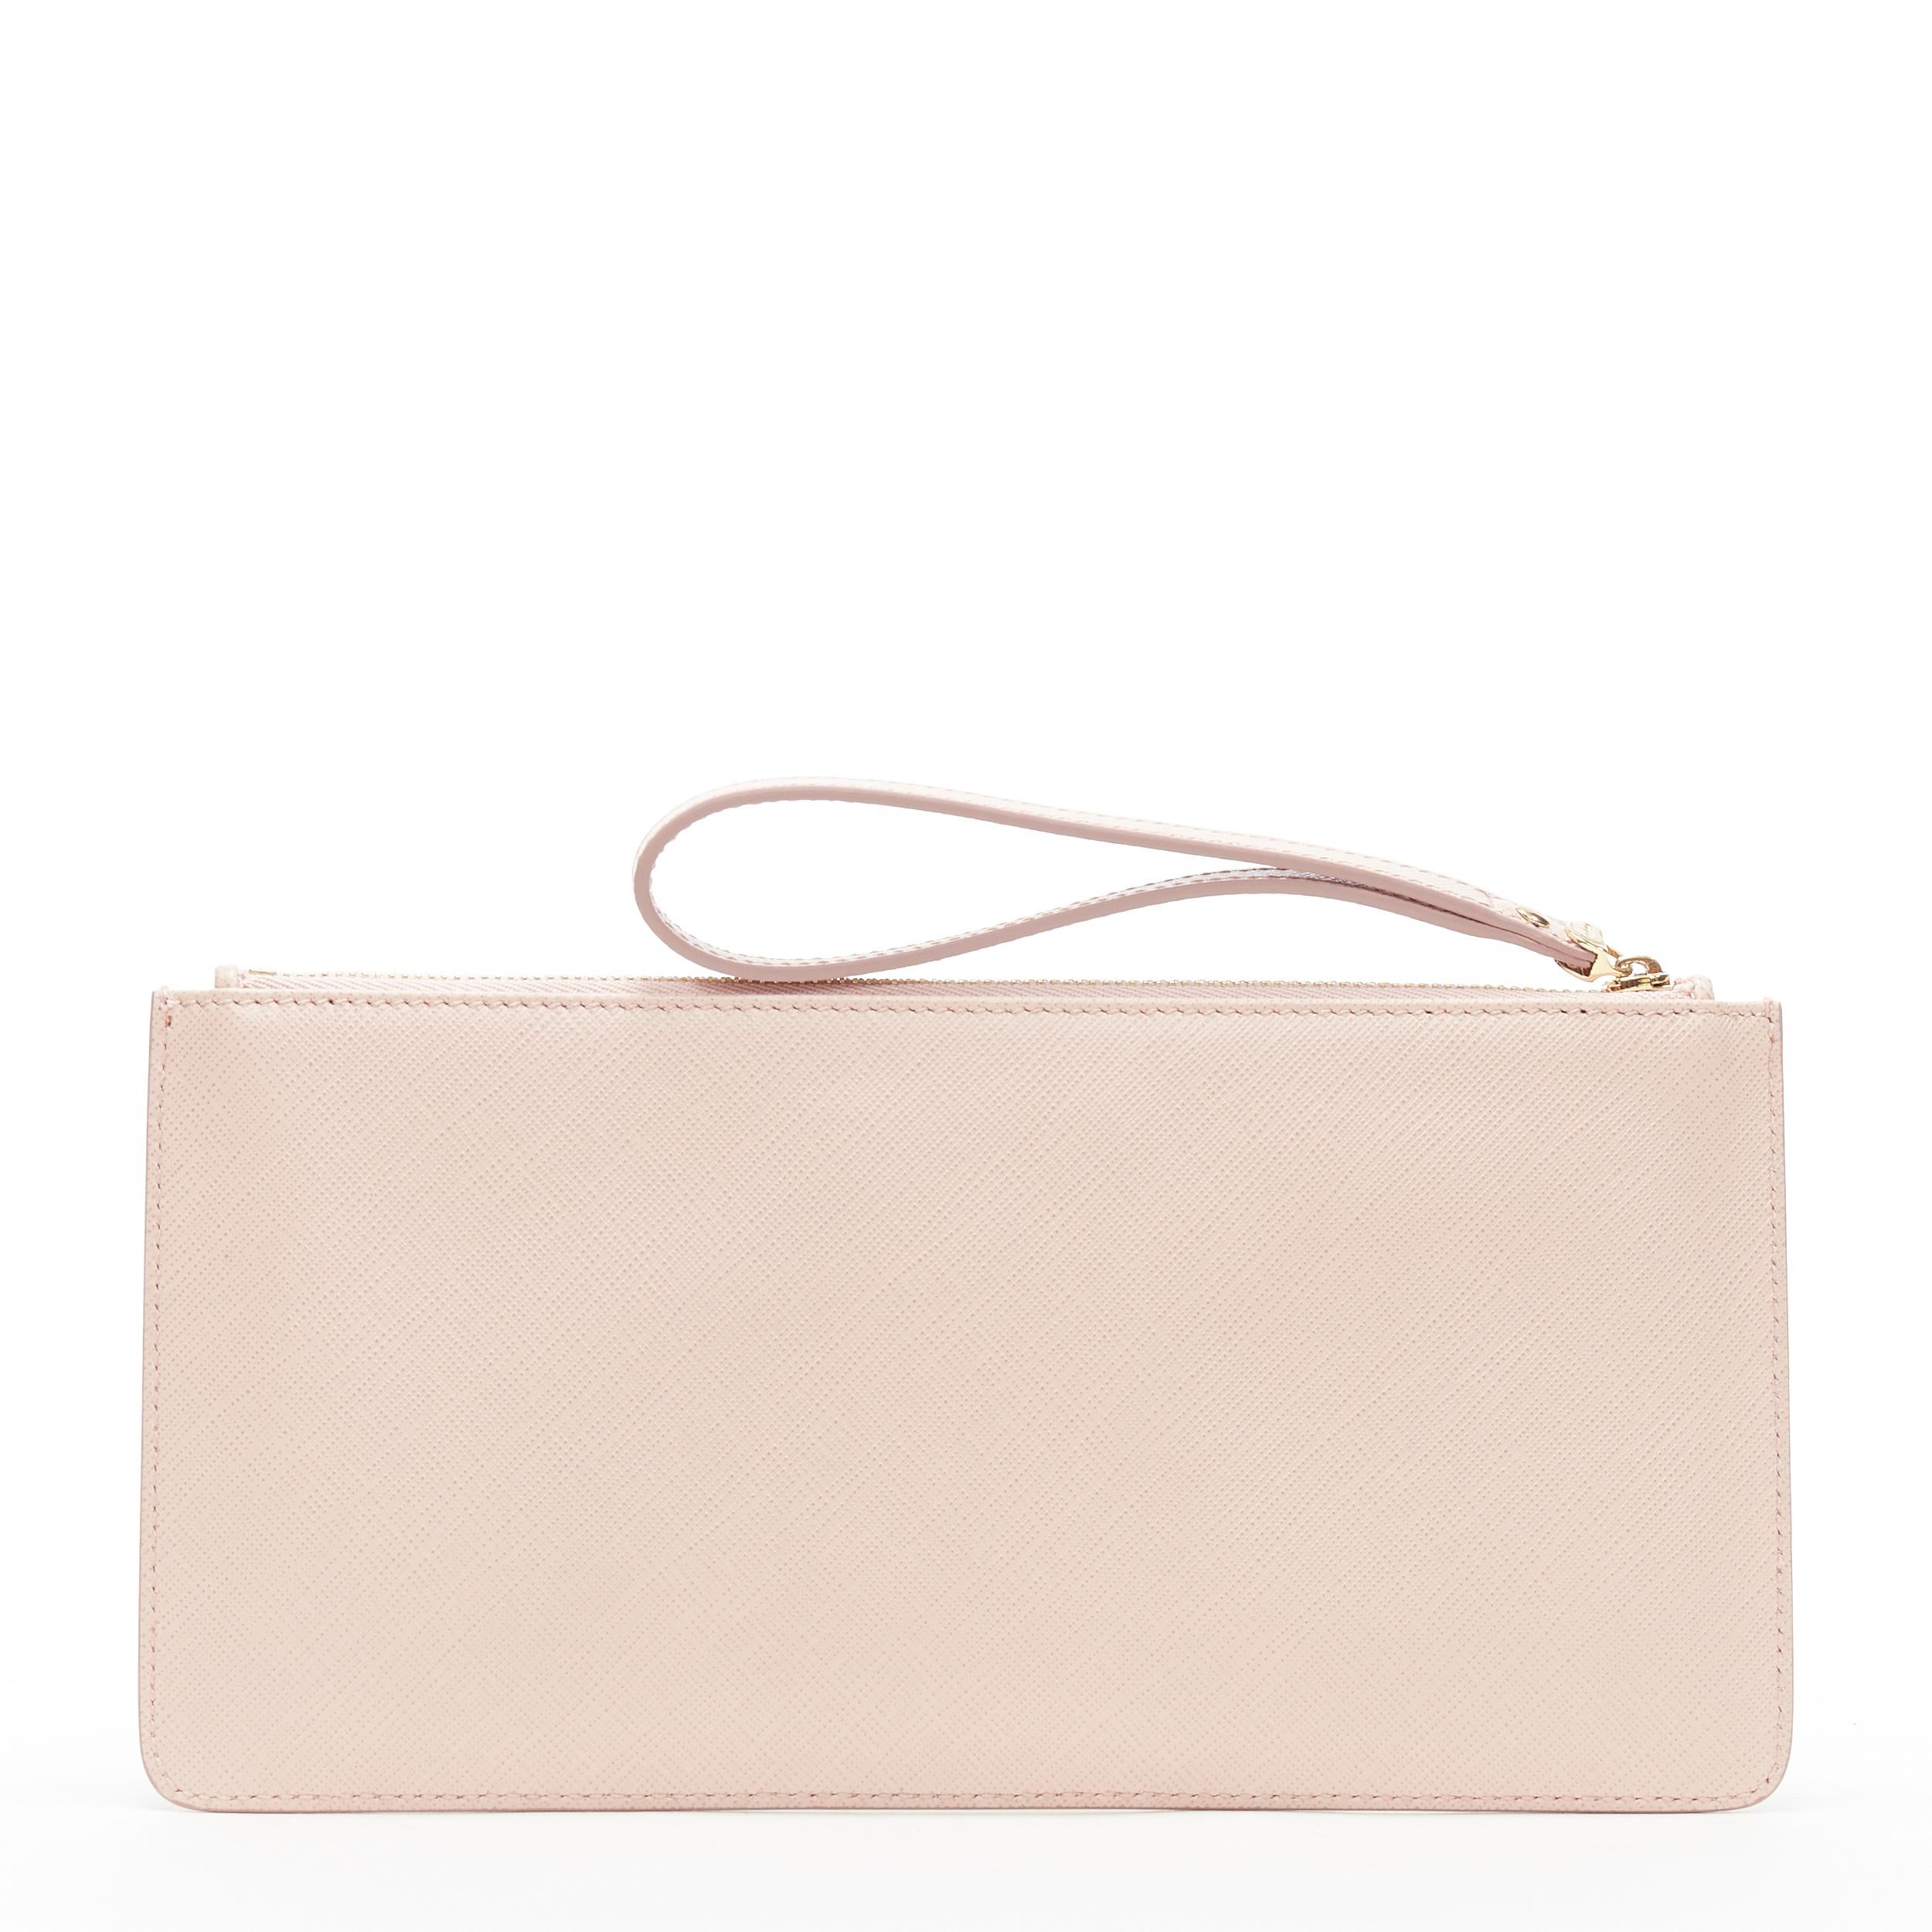 new SALVATORE FERRAGAMO blush pink gold logo top zip wristlet pouch clutch bag
Brand: Salvatore Ferragamo
Model Name / Style: Zip pouch
Material: Leather
Color: Pink
Pattern: Solid
Closure: Zip
Extra Detail:
Made in: Italy

CONDITION: 
Condition: